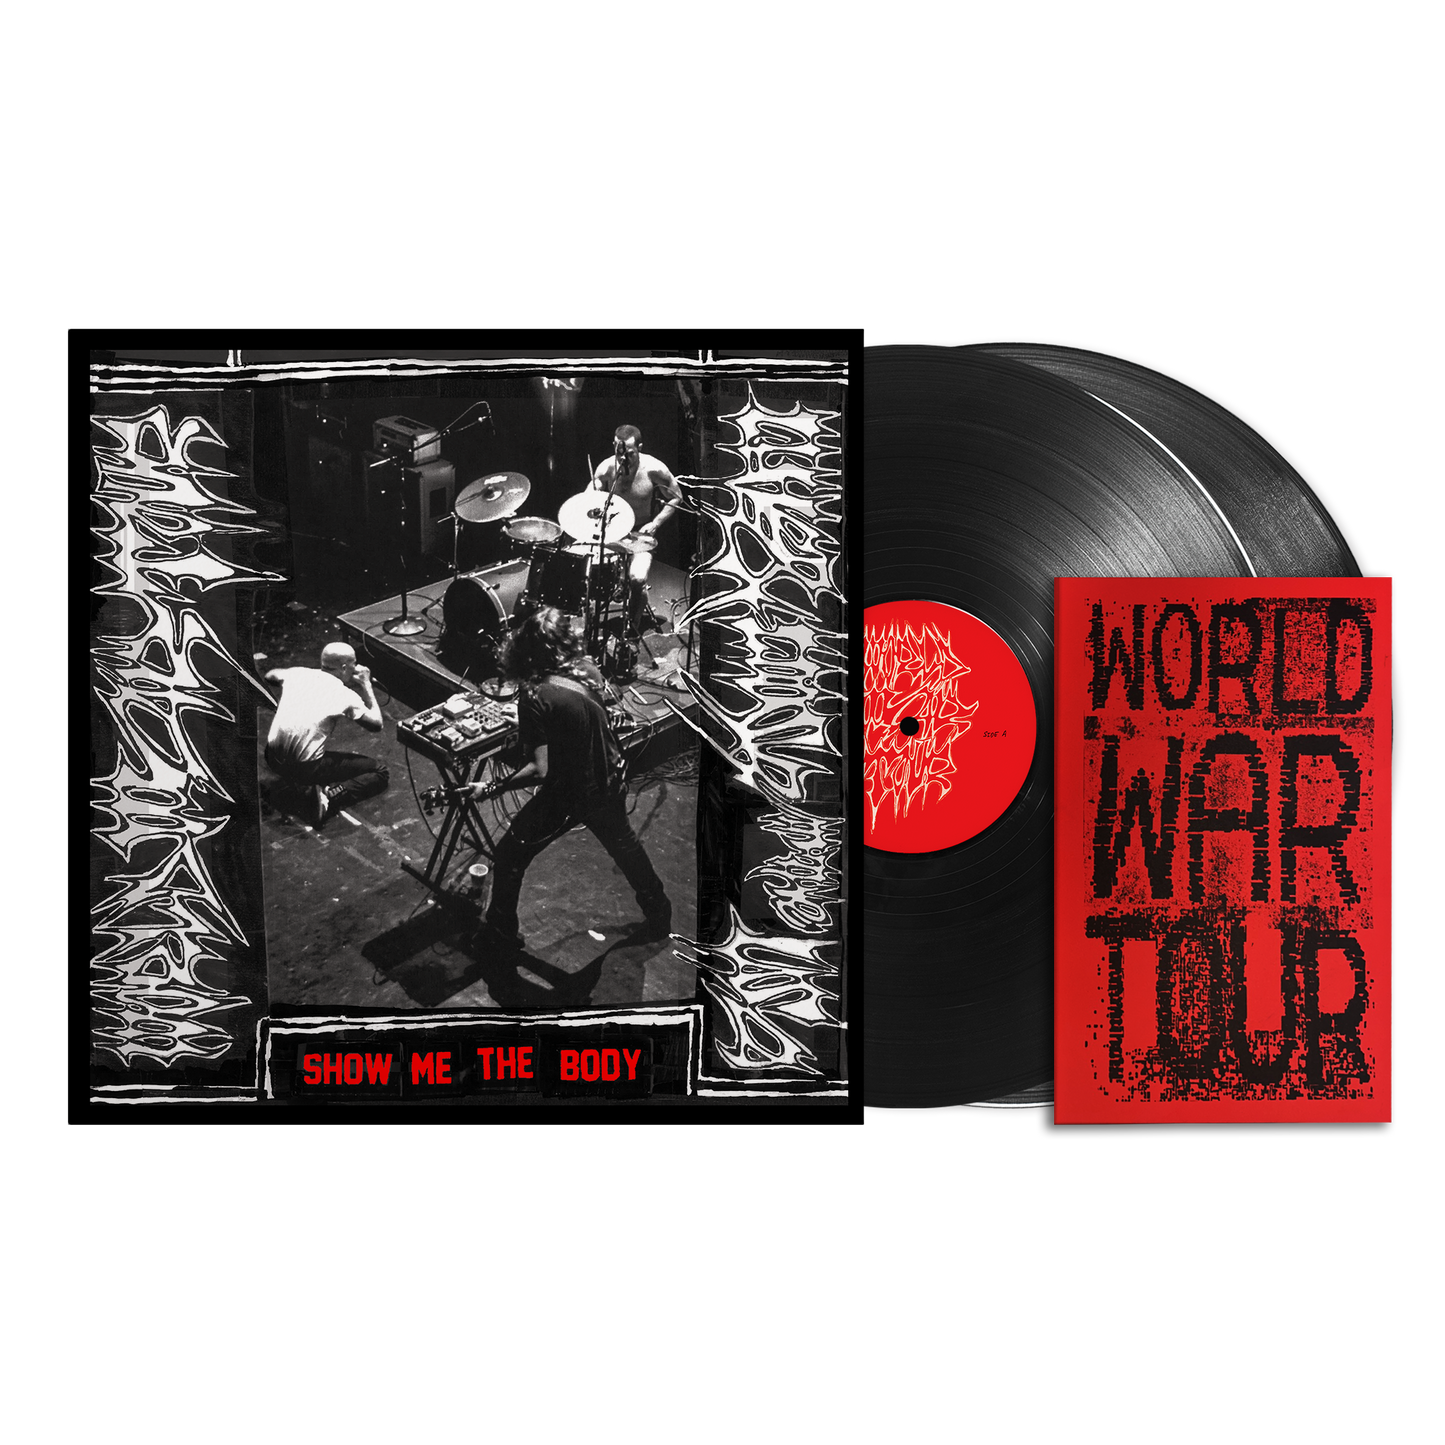 Live And Loose in the USA 2LP + WWT Book Bundle Pre-Order